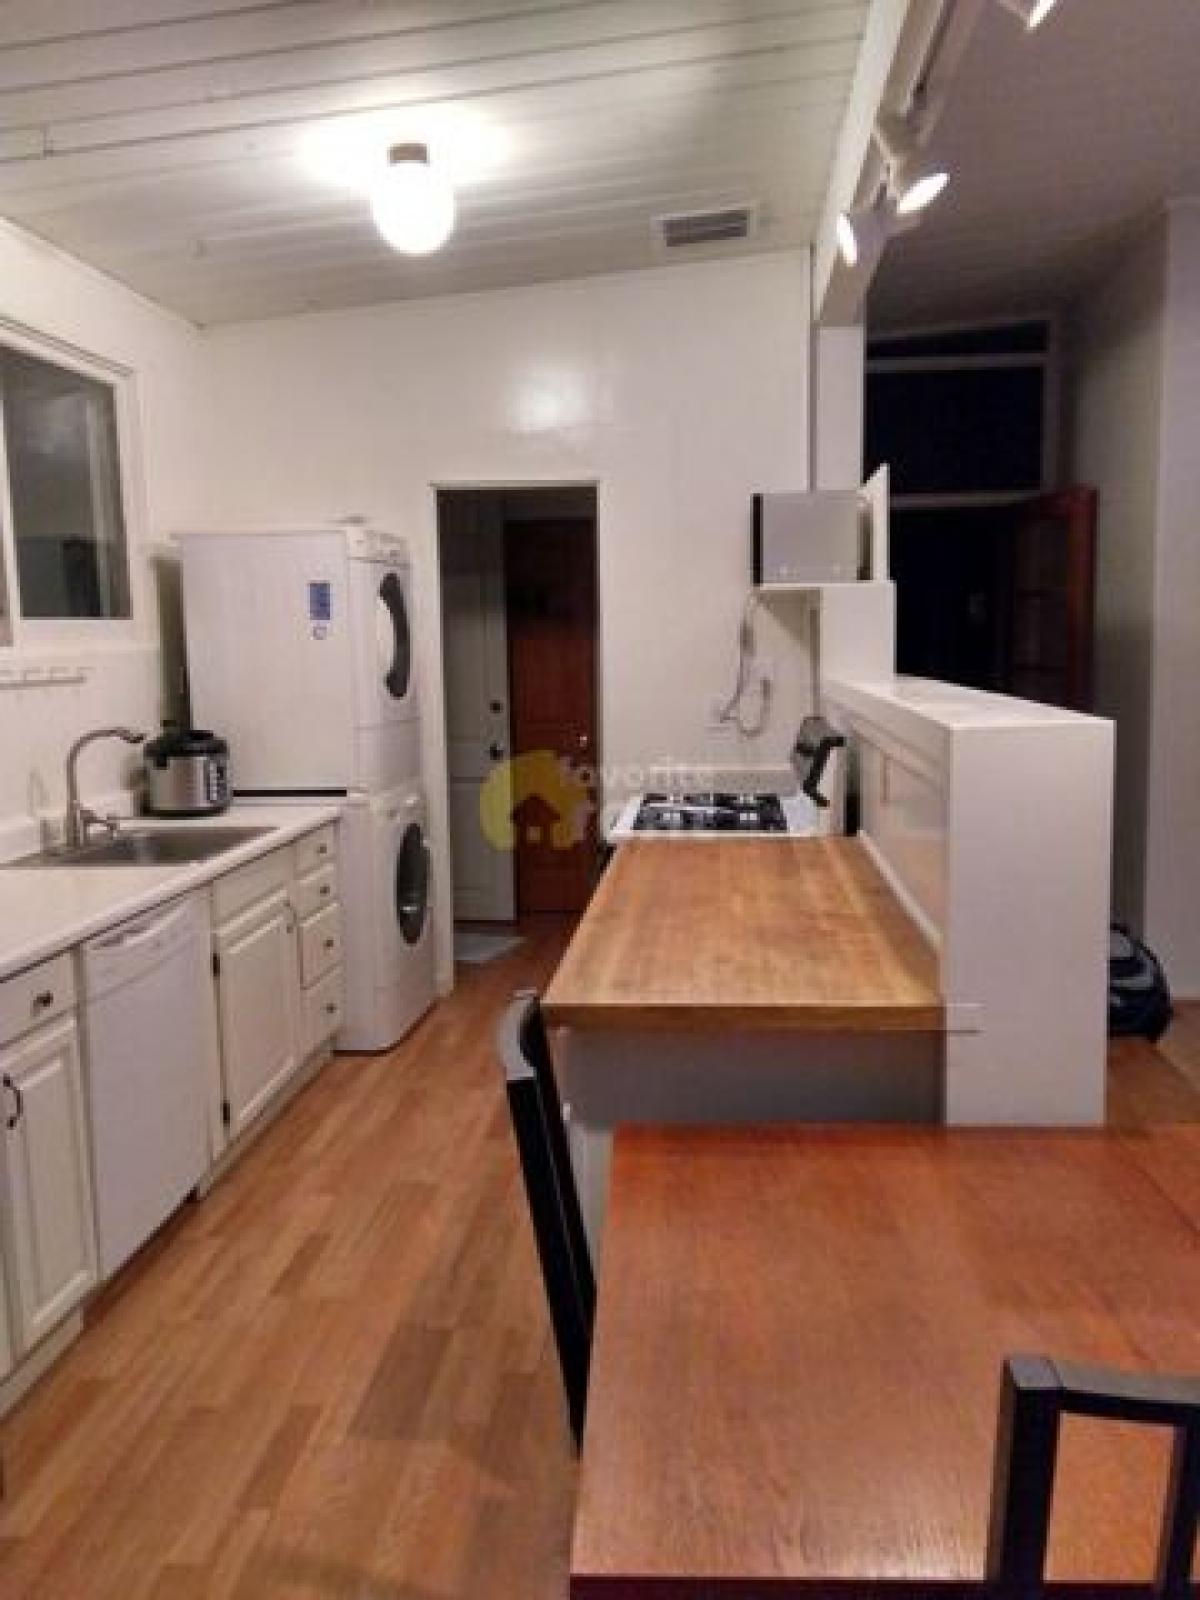 Picture of Home For Rent in Palo Alto, California, United States